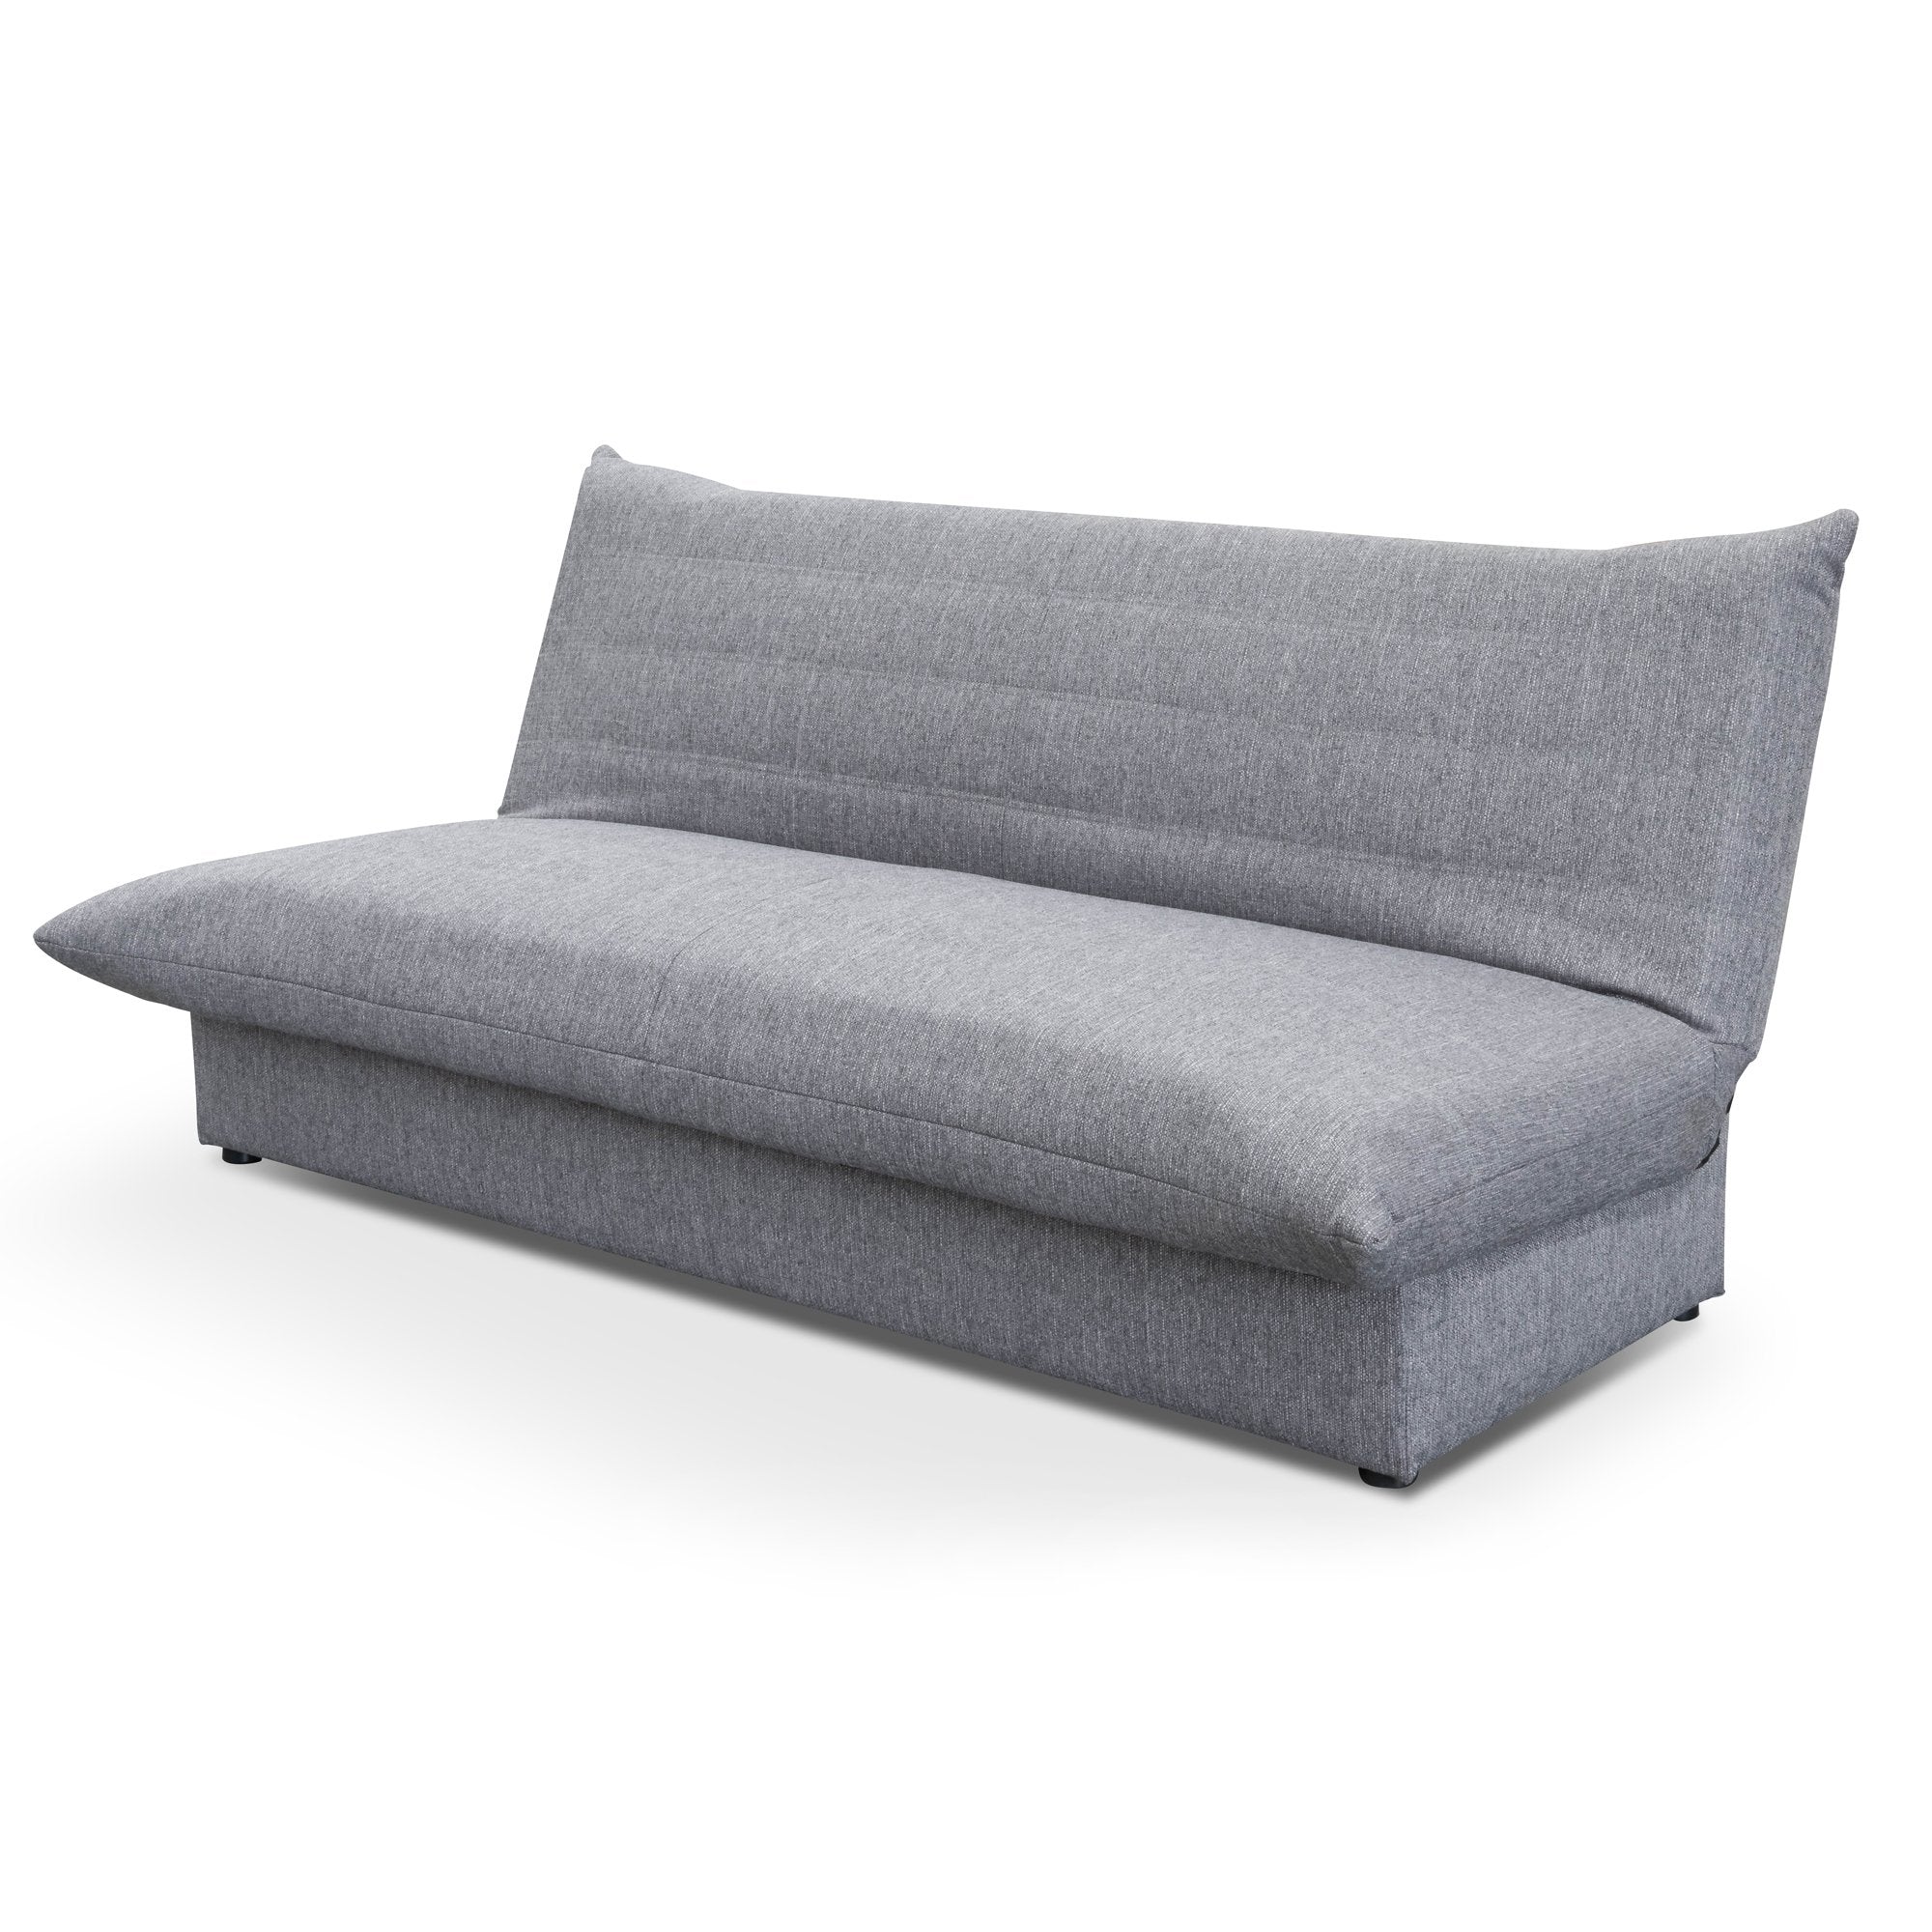 Alice 2 Seater Sofa Bed - Cloudy Grey